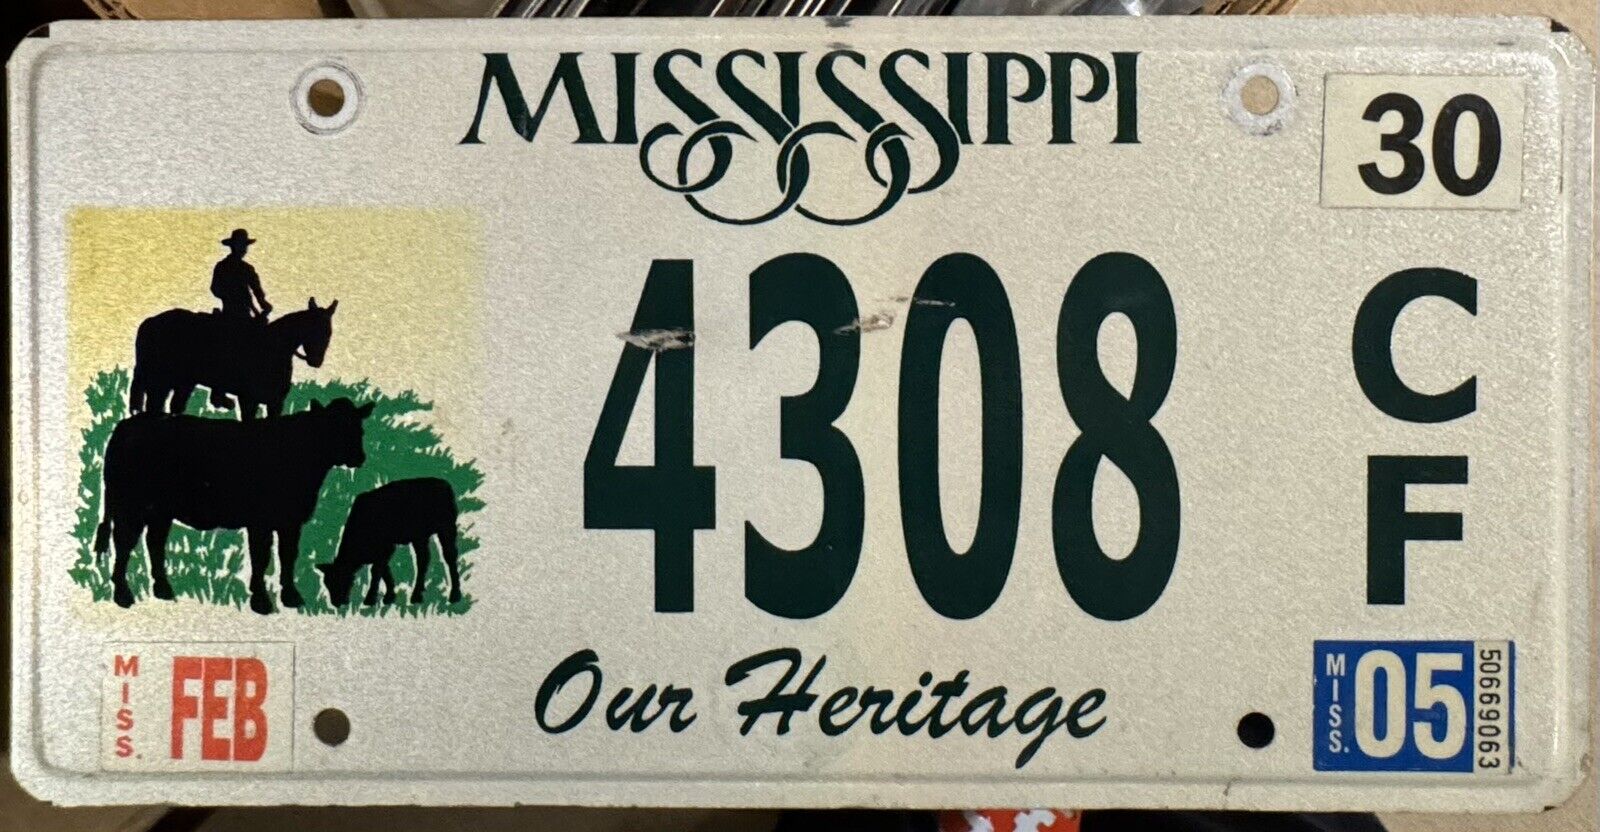 2005 Mississippi Our Heritage License Plate